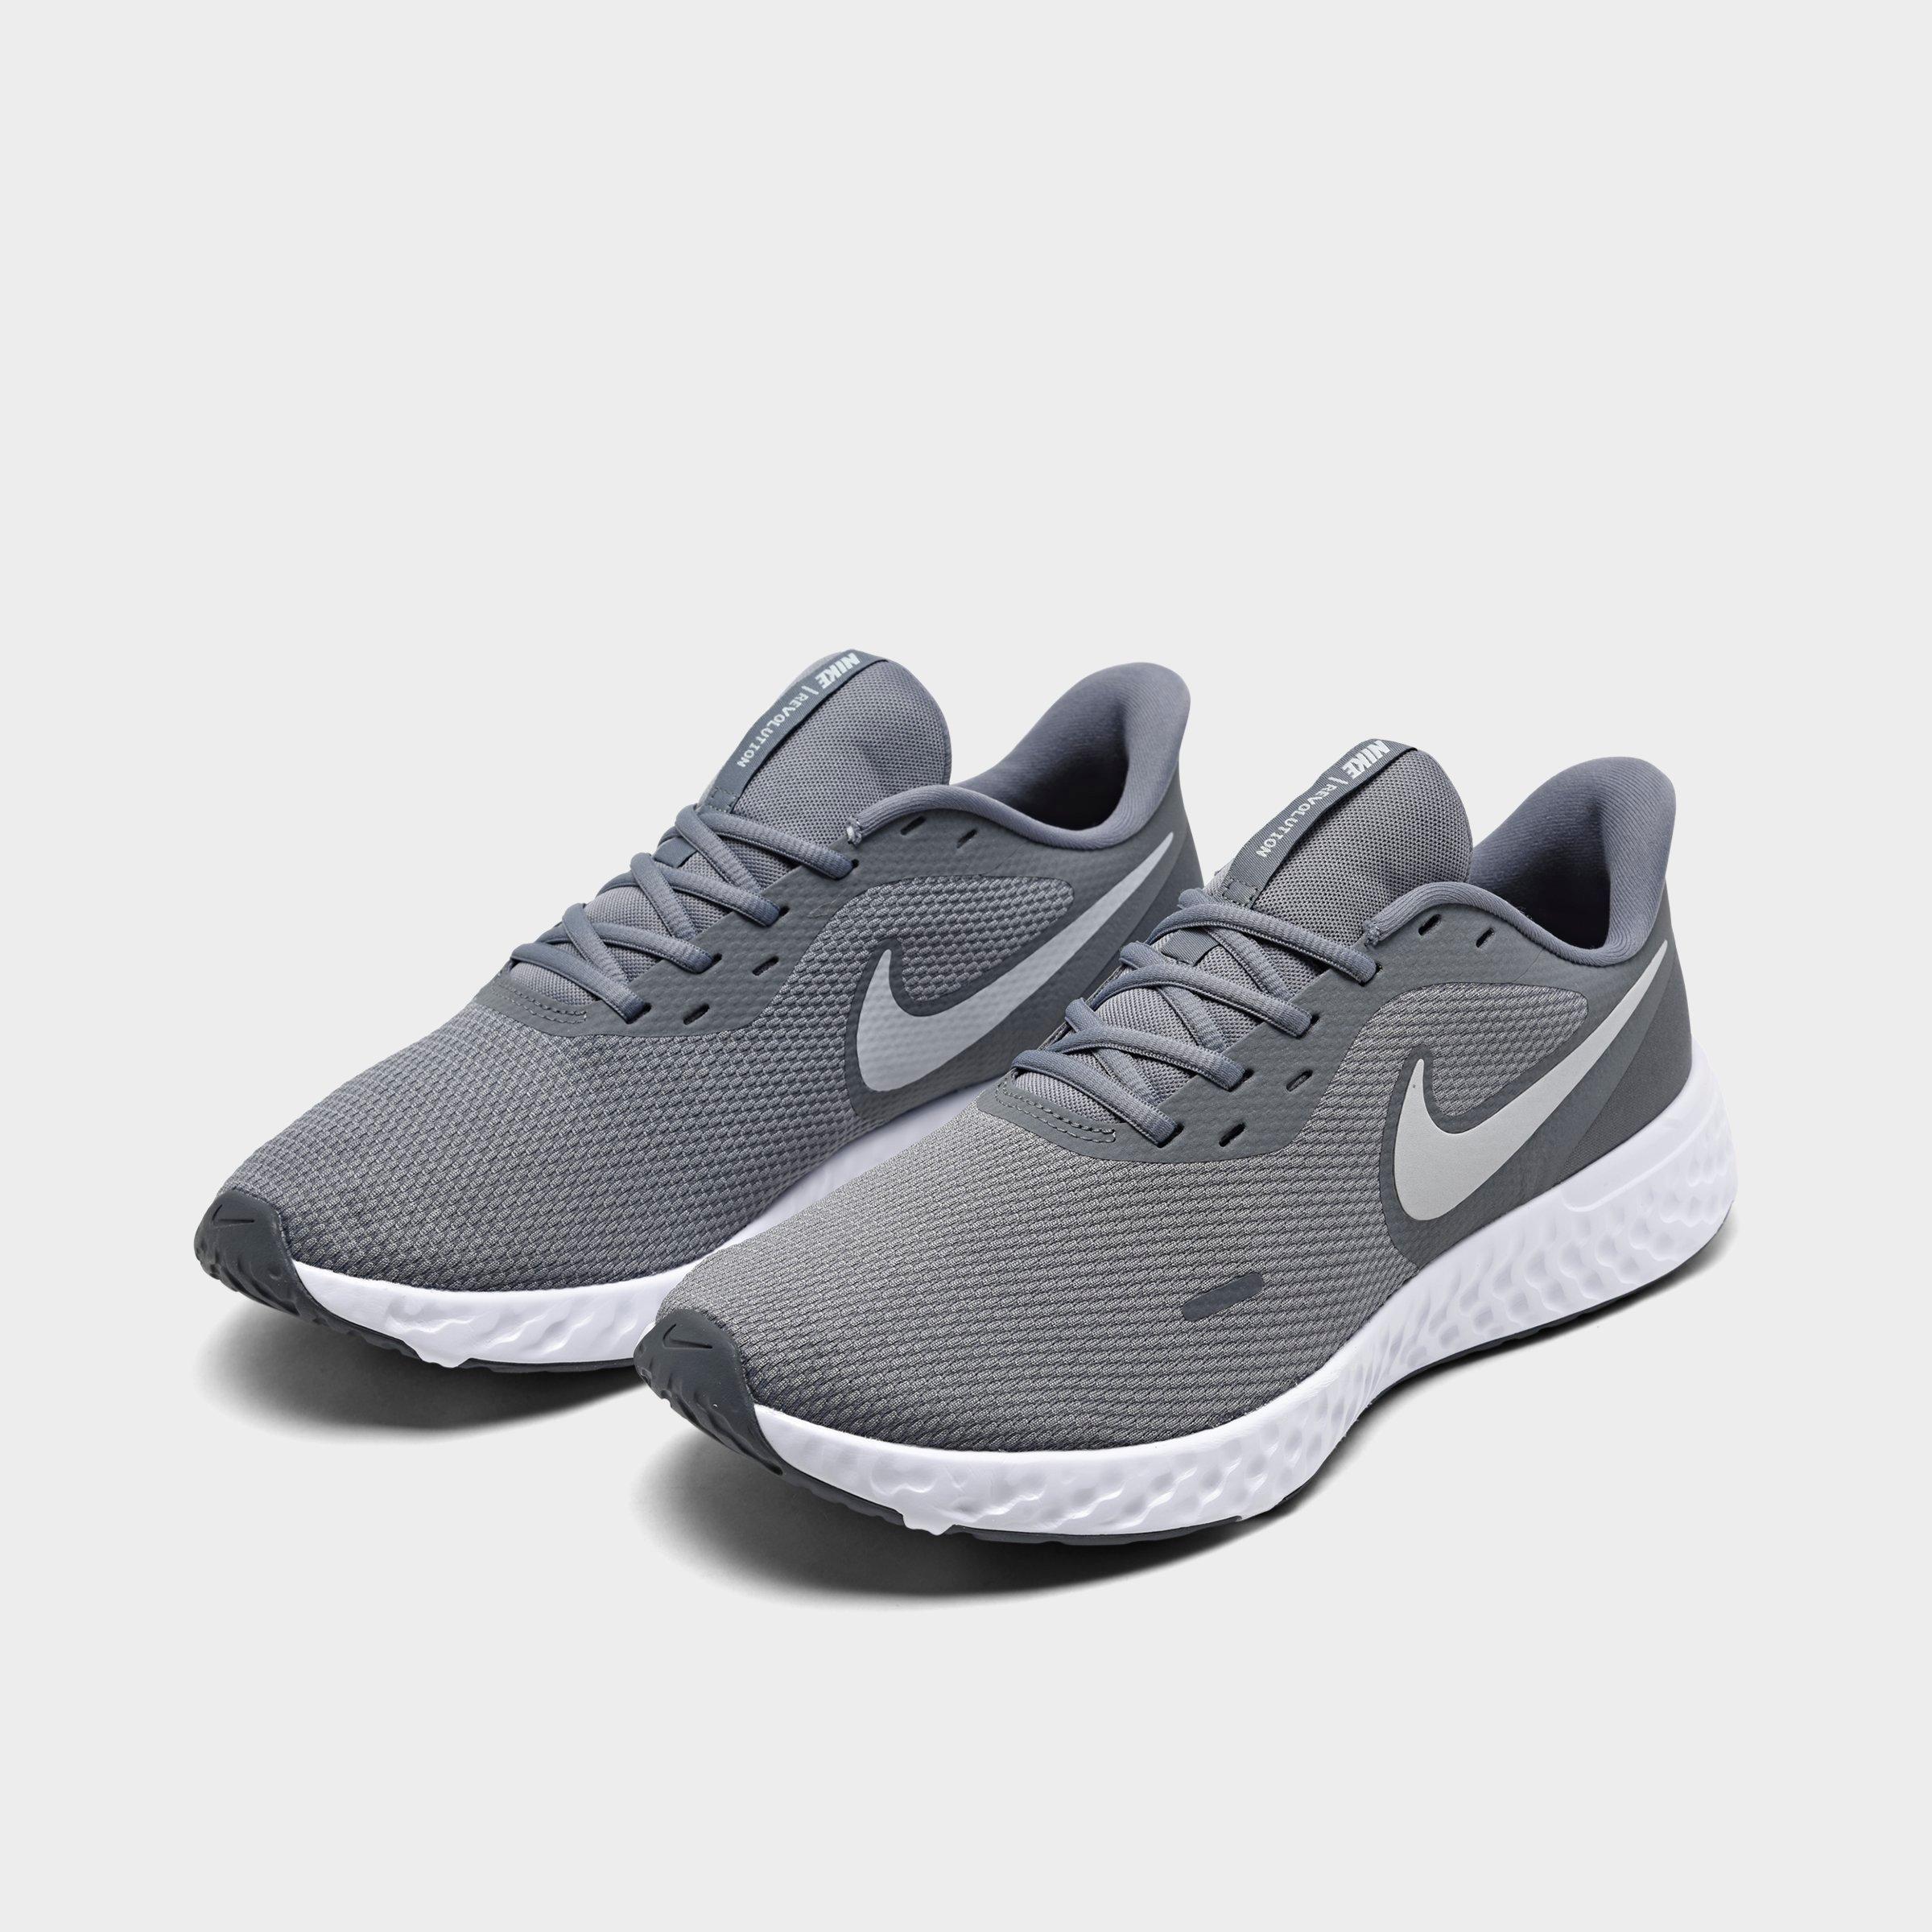 mens nike shoes wide widths